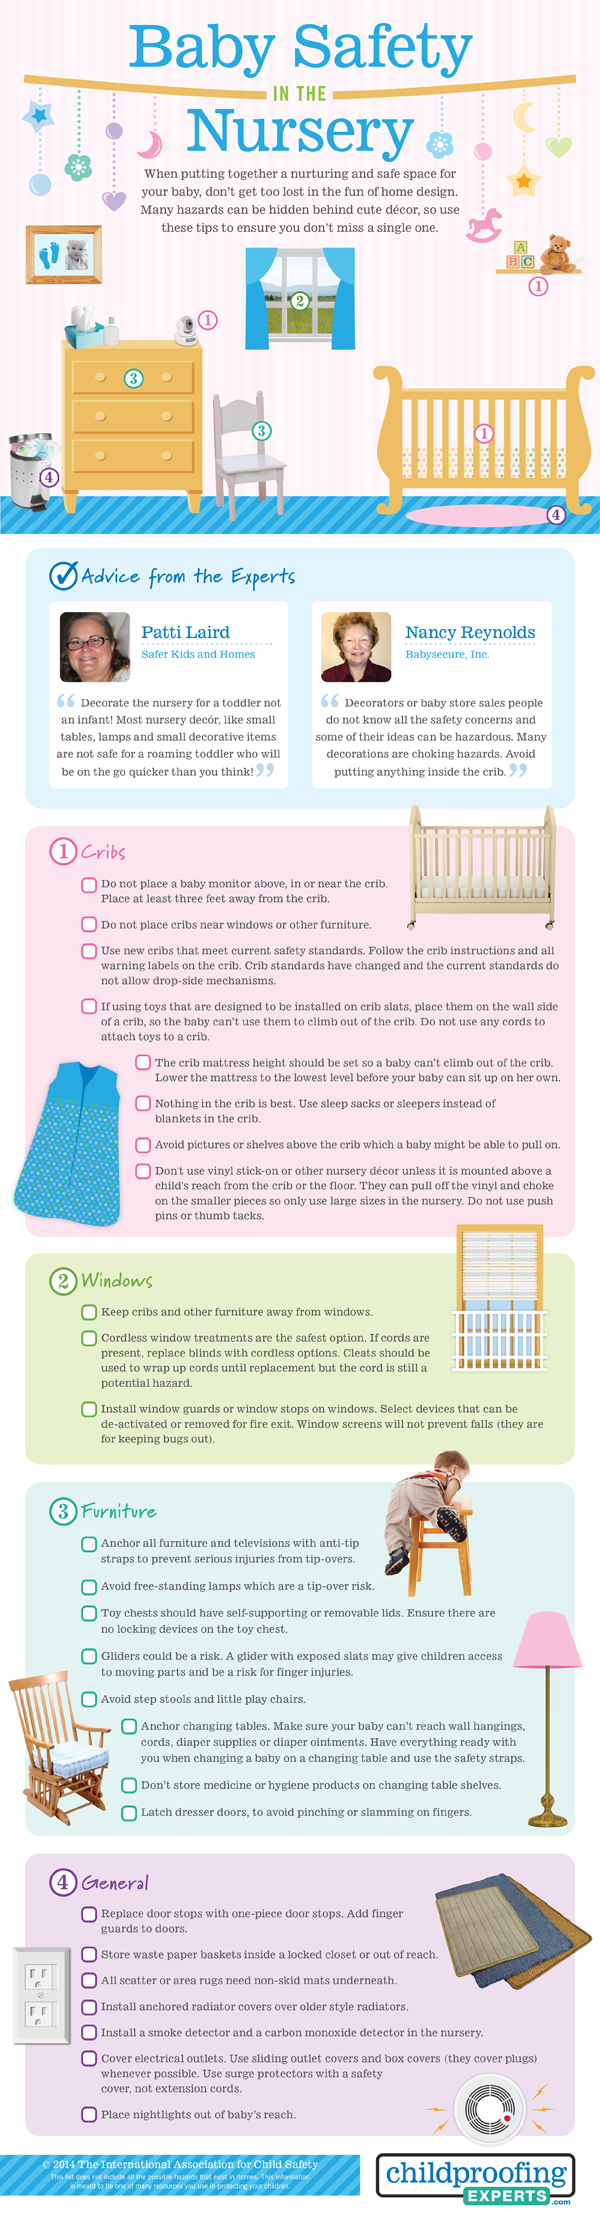 Baby Safety in the Nursery